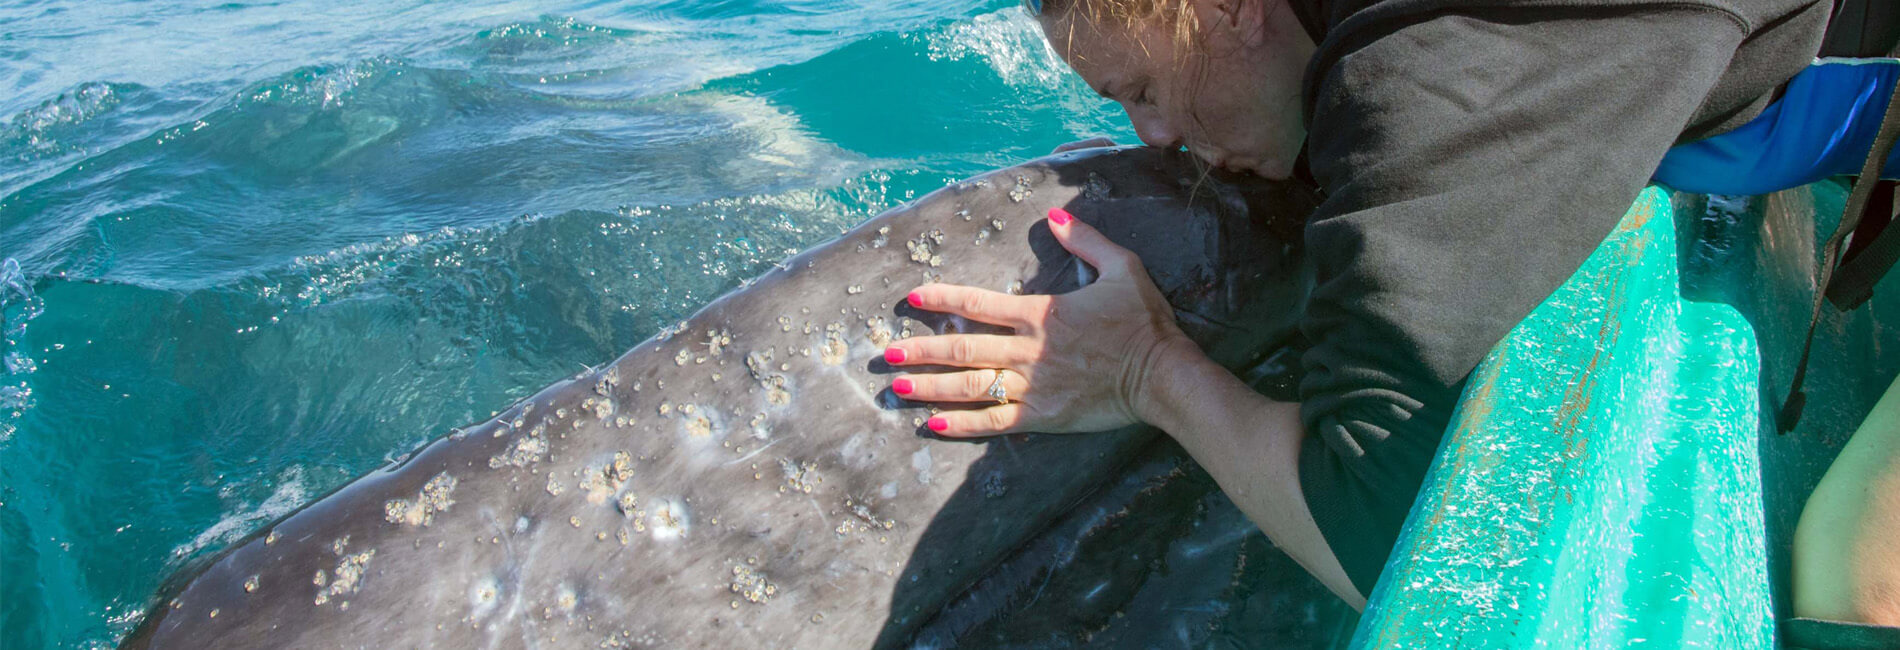 kissing a gray whale